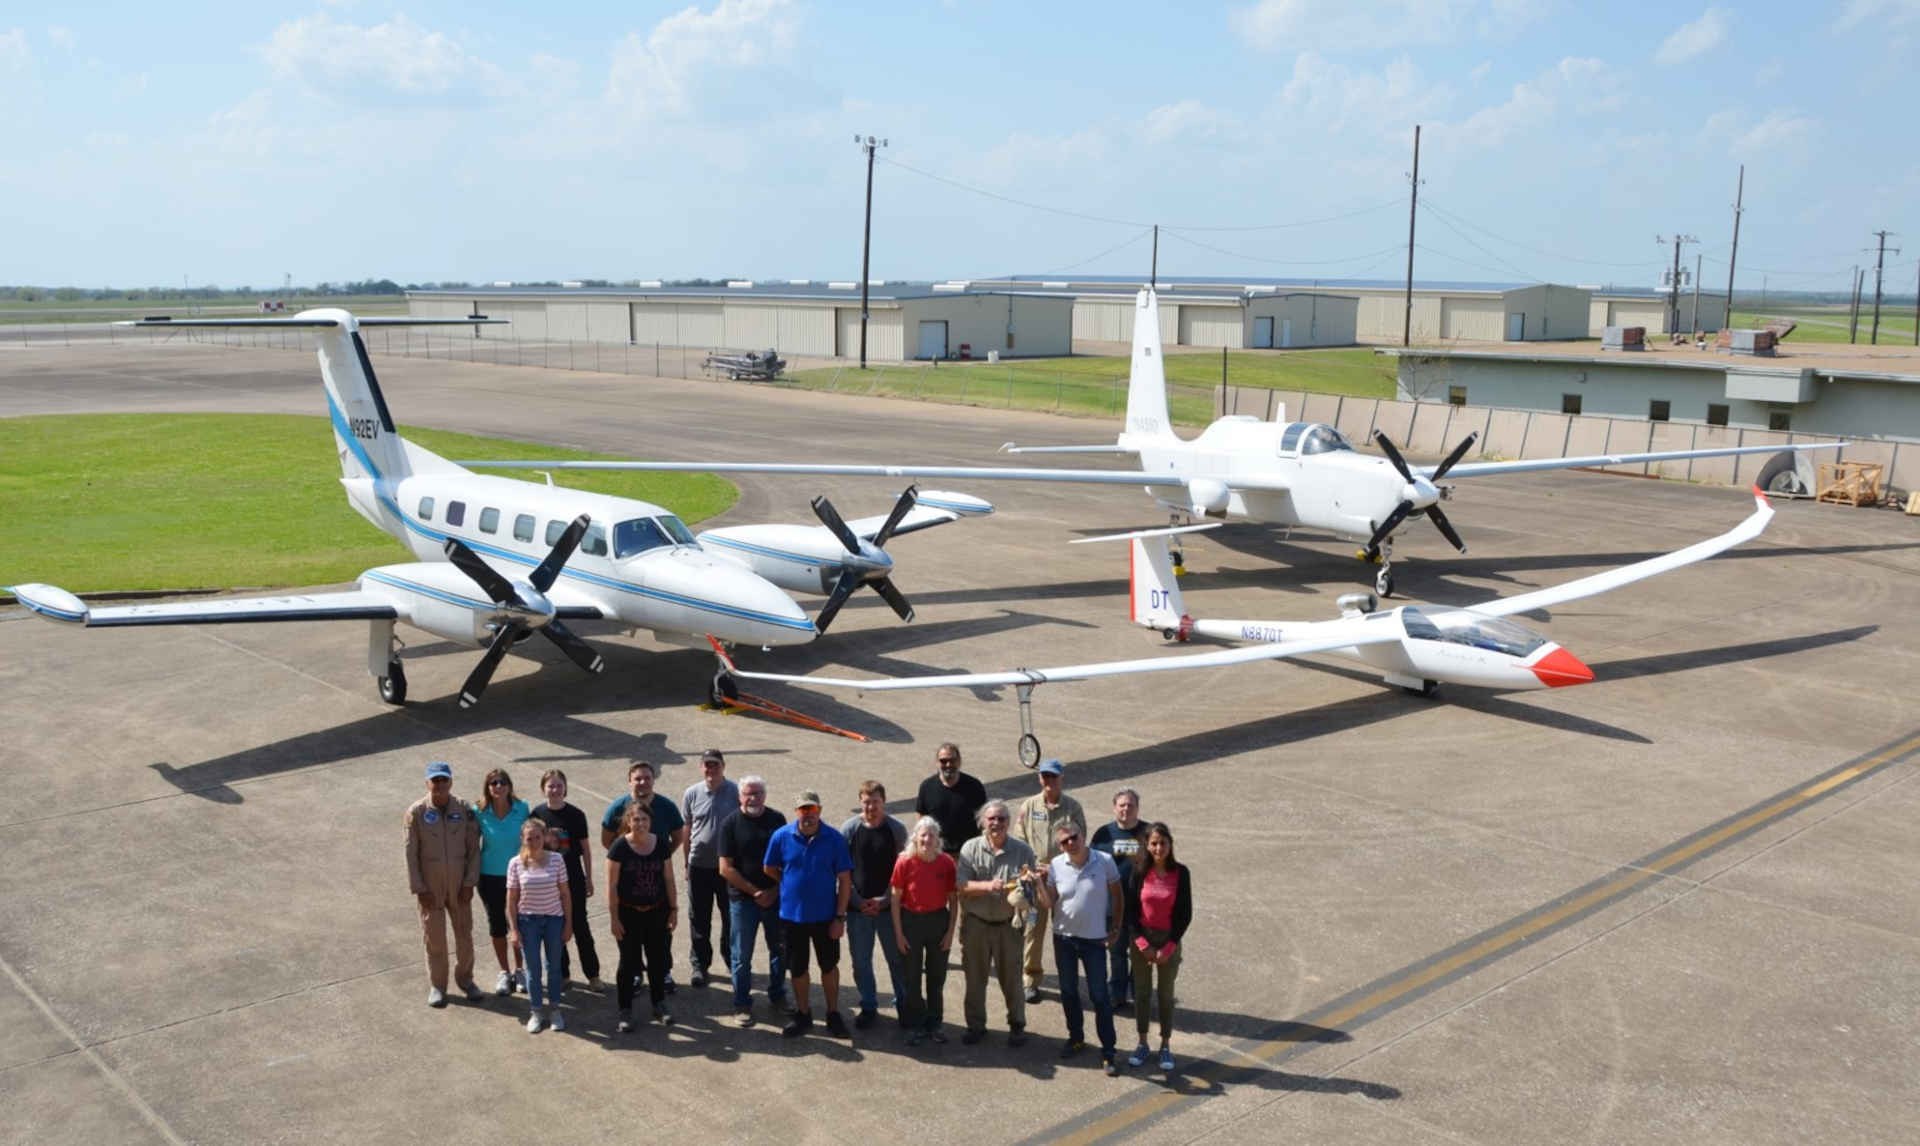 Group photo of the Blue Condor project team